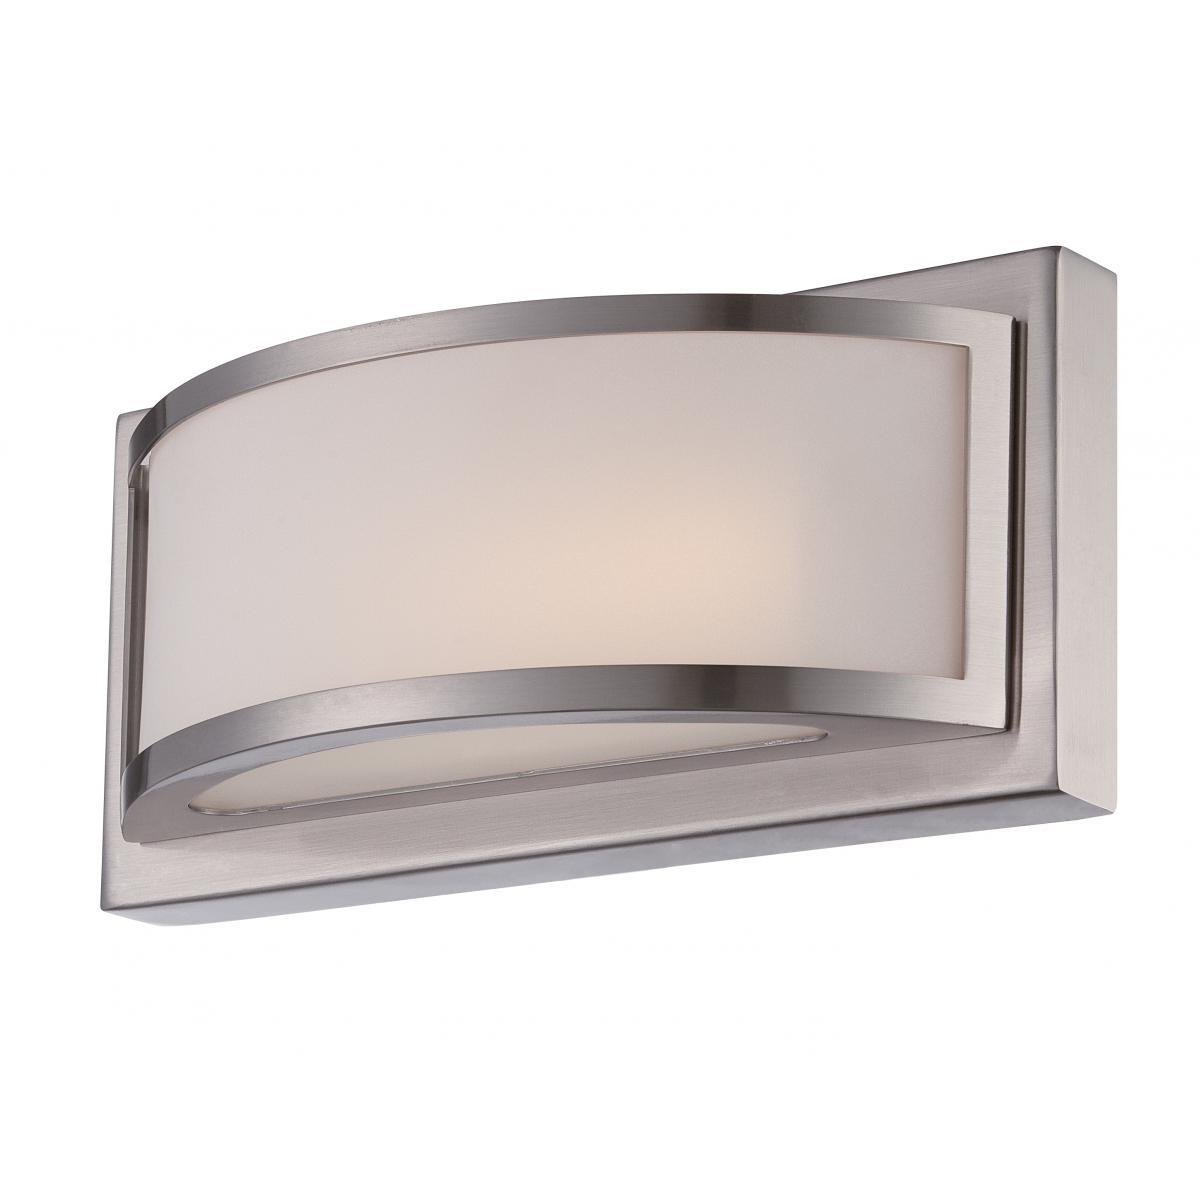 Mercer (1) LED Wall Sconce Wall Nuvo Lighting 